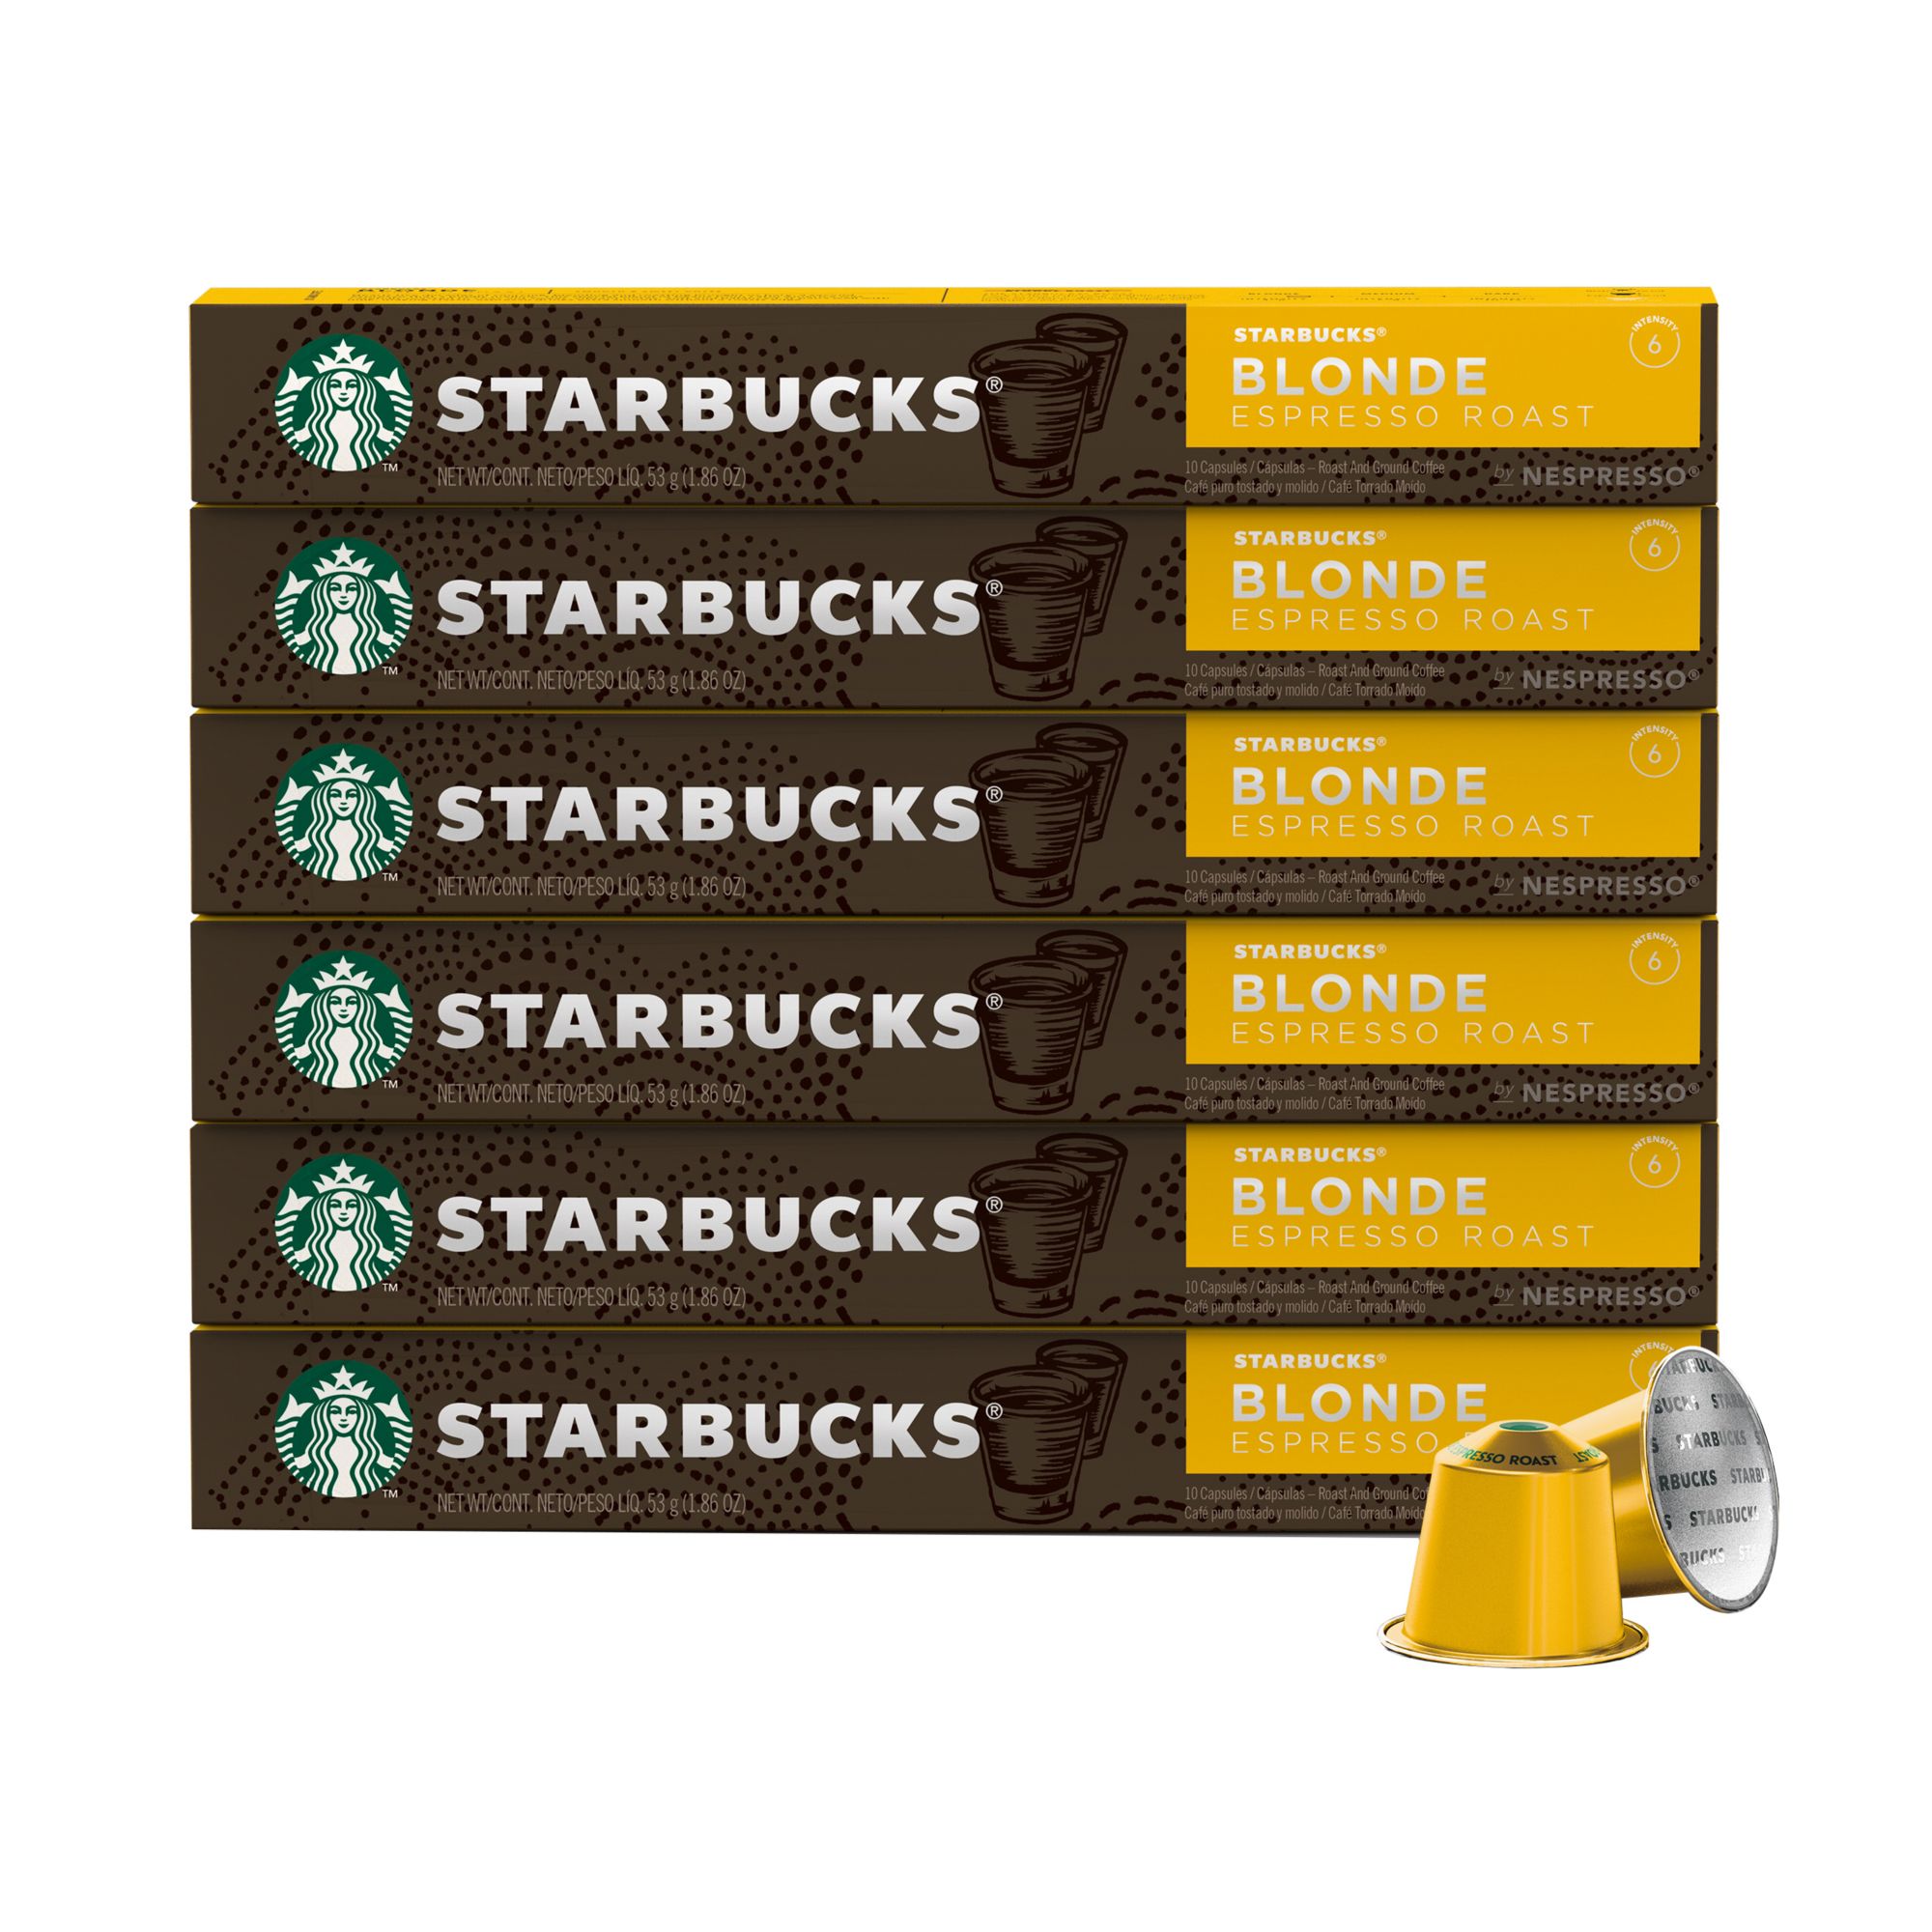 Starbucks By Nespresso Coffee Pods Variety Pack 60 Capsules (10 of